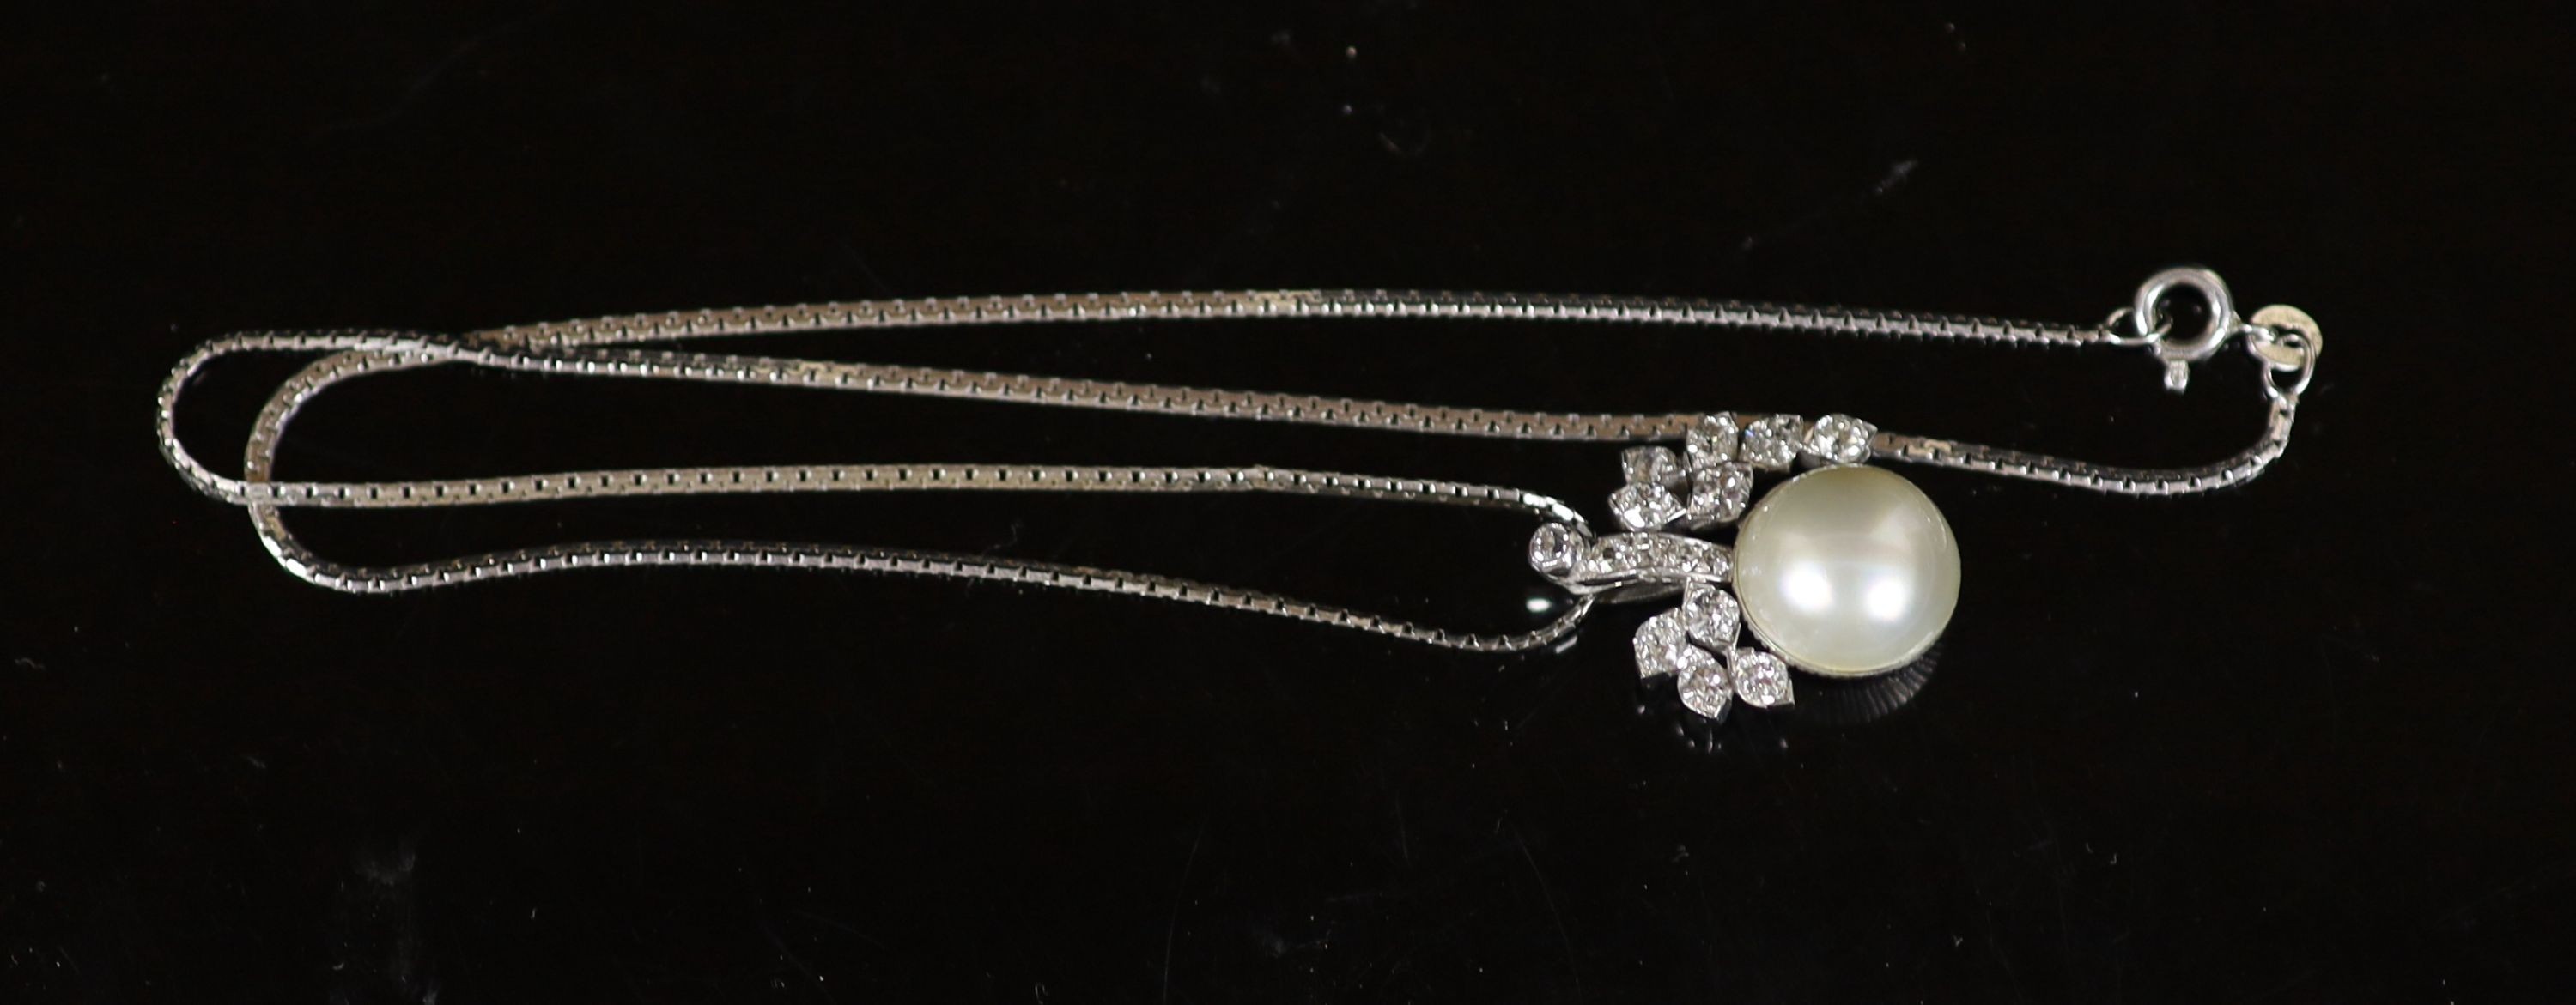 A white gold, mabe pearl and diamond cluster set pendant